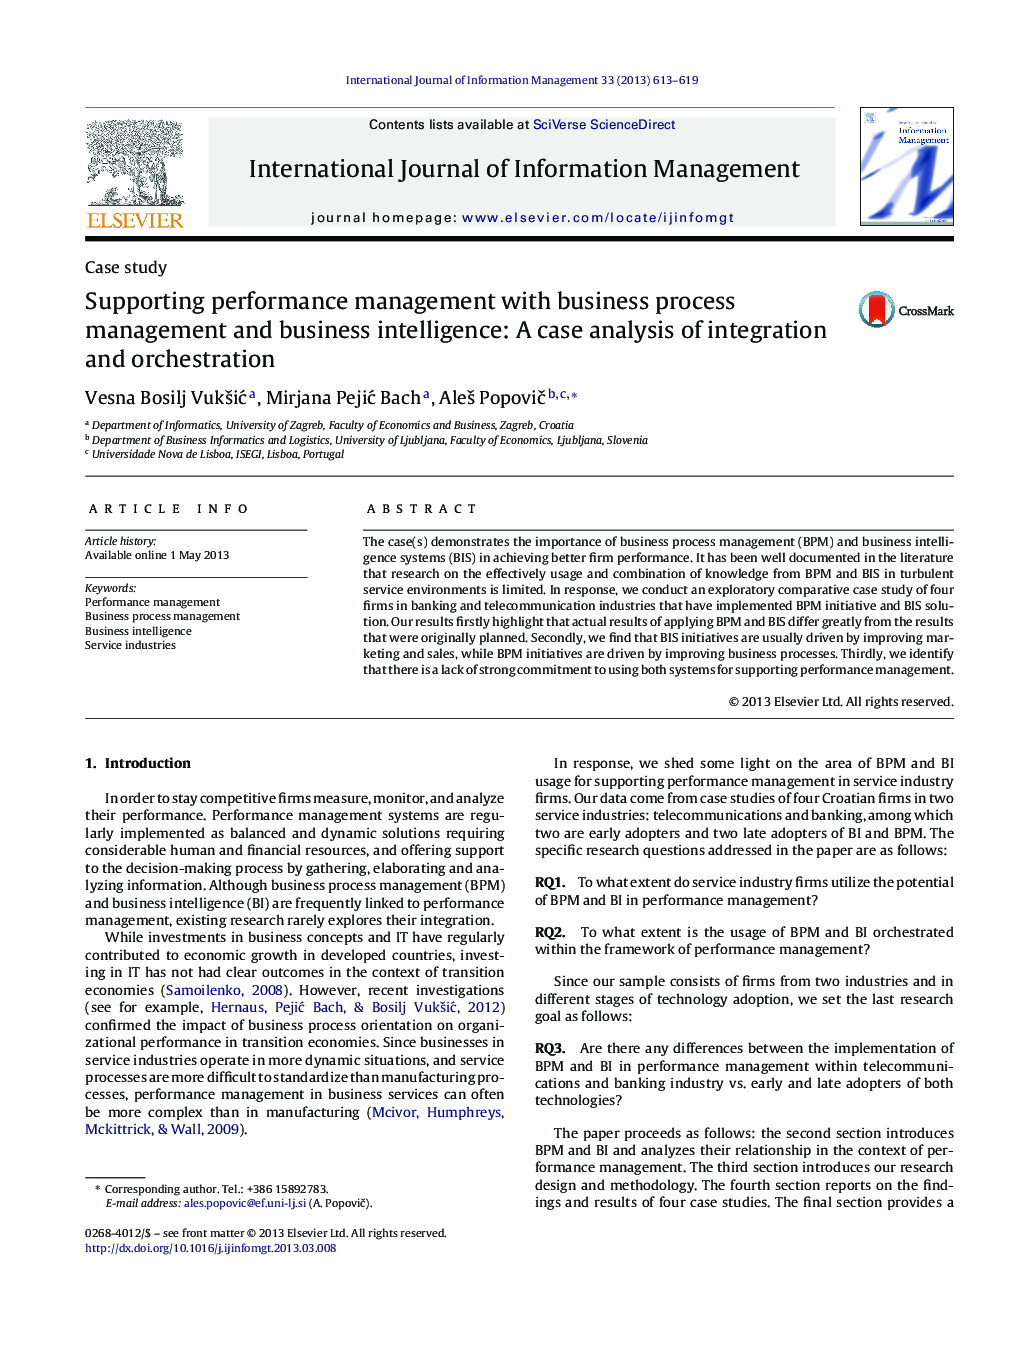 Supporting performance management with business process management and business intelligence: A case analysis of integration and orchestration